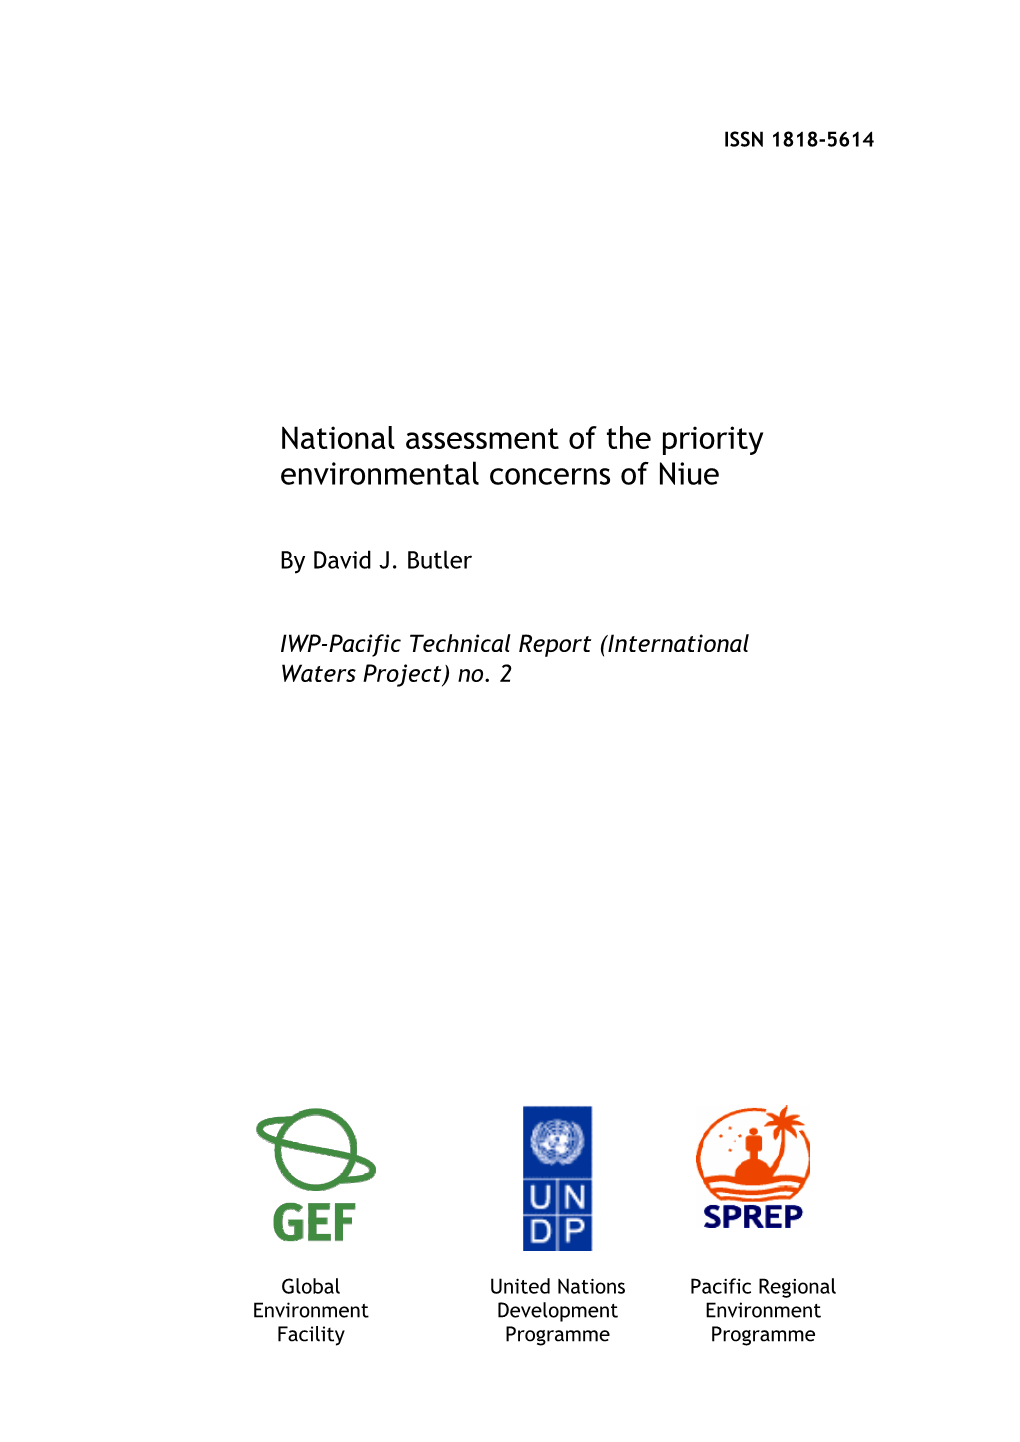 National Assessment of the Priority Environmental Concerns of Niue